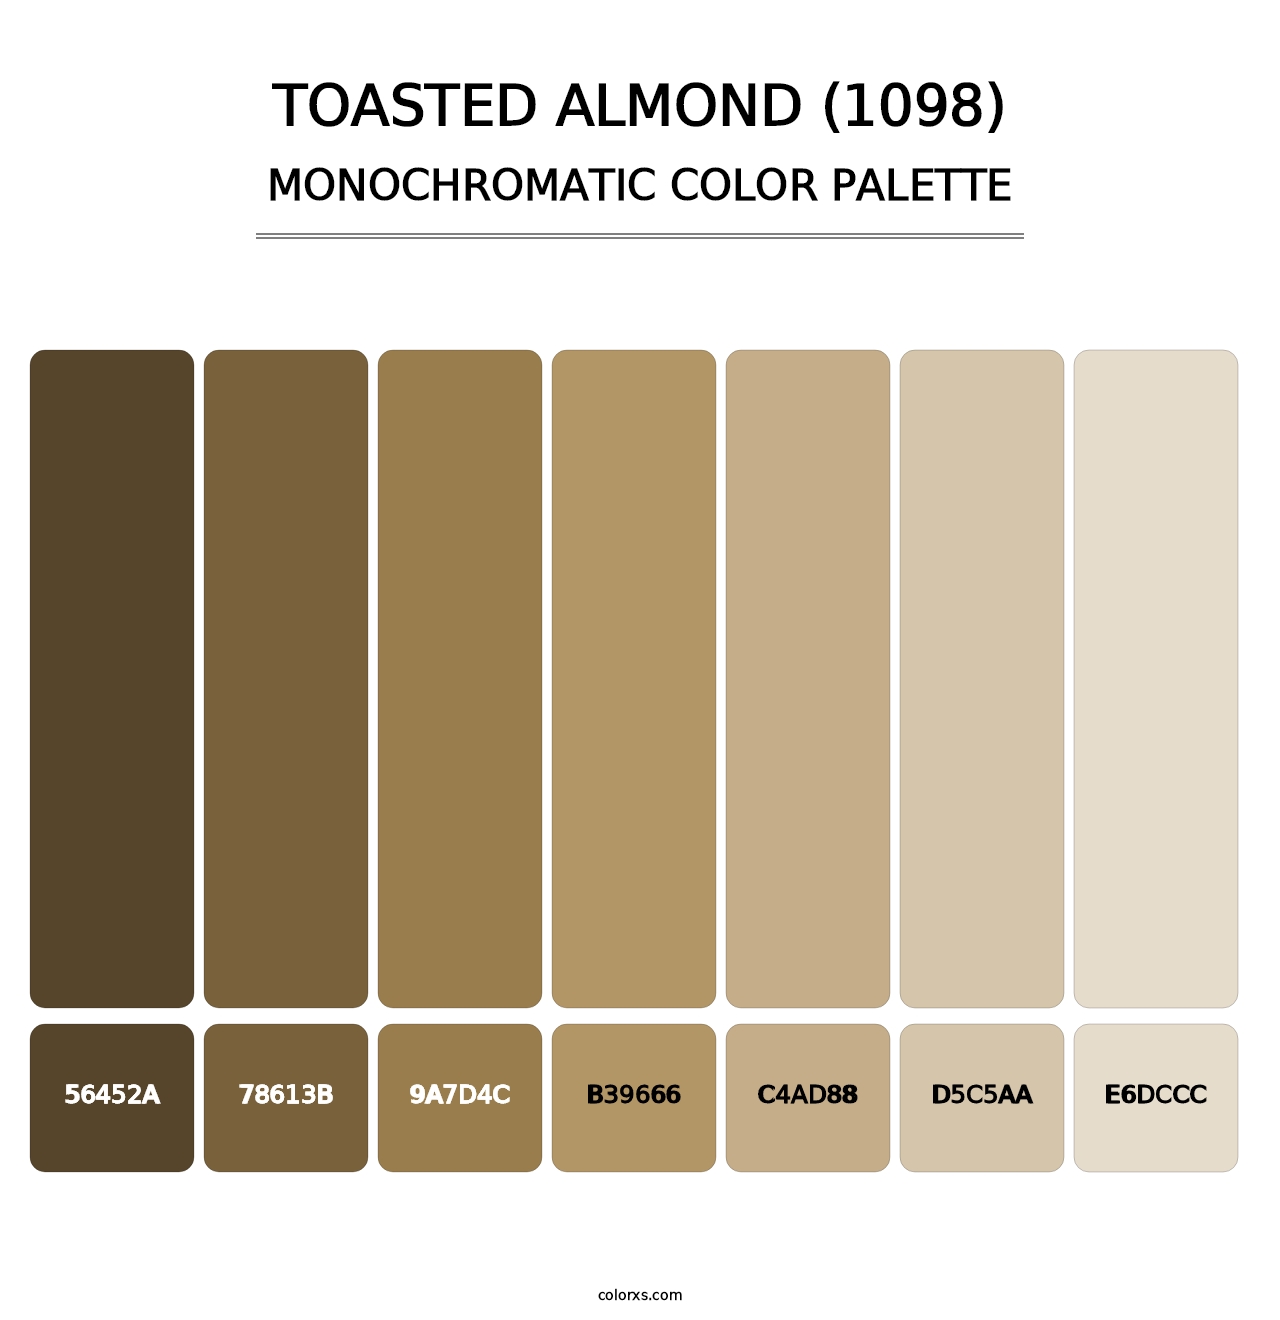 Toasted Almond (1098) - Monochromatic Color Palette